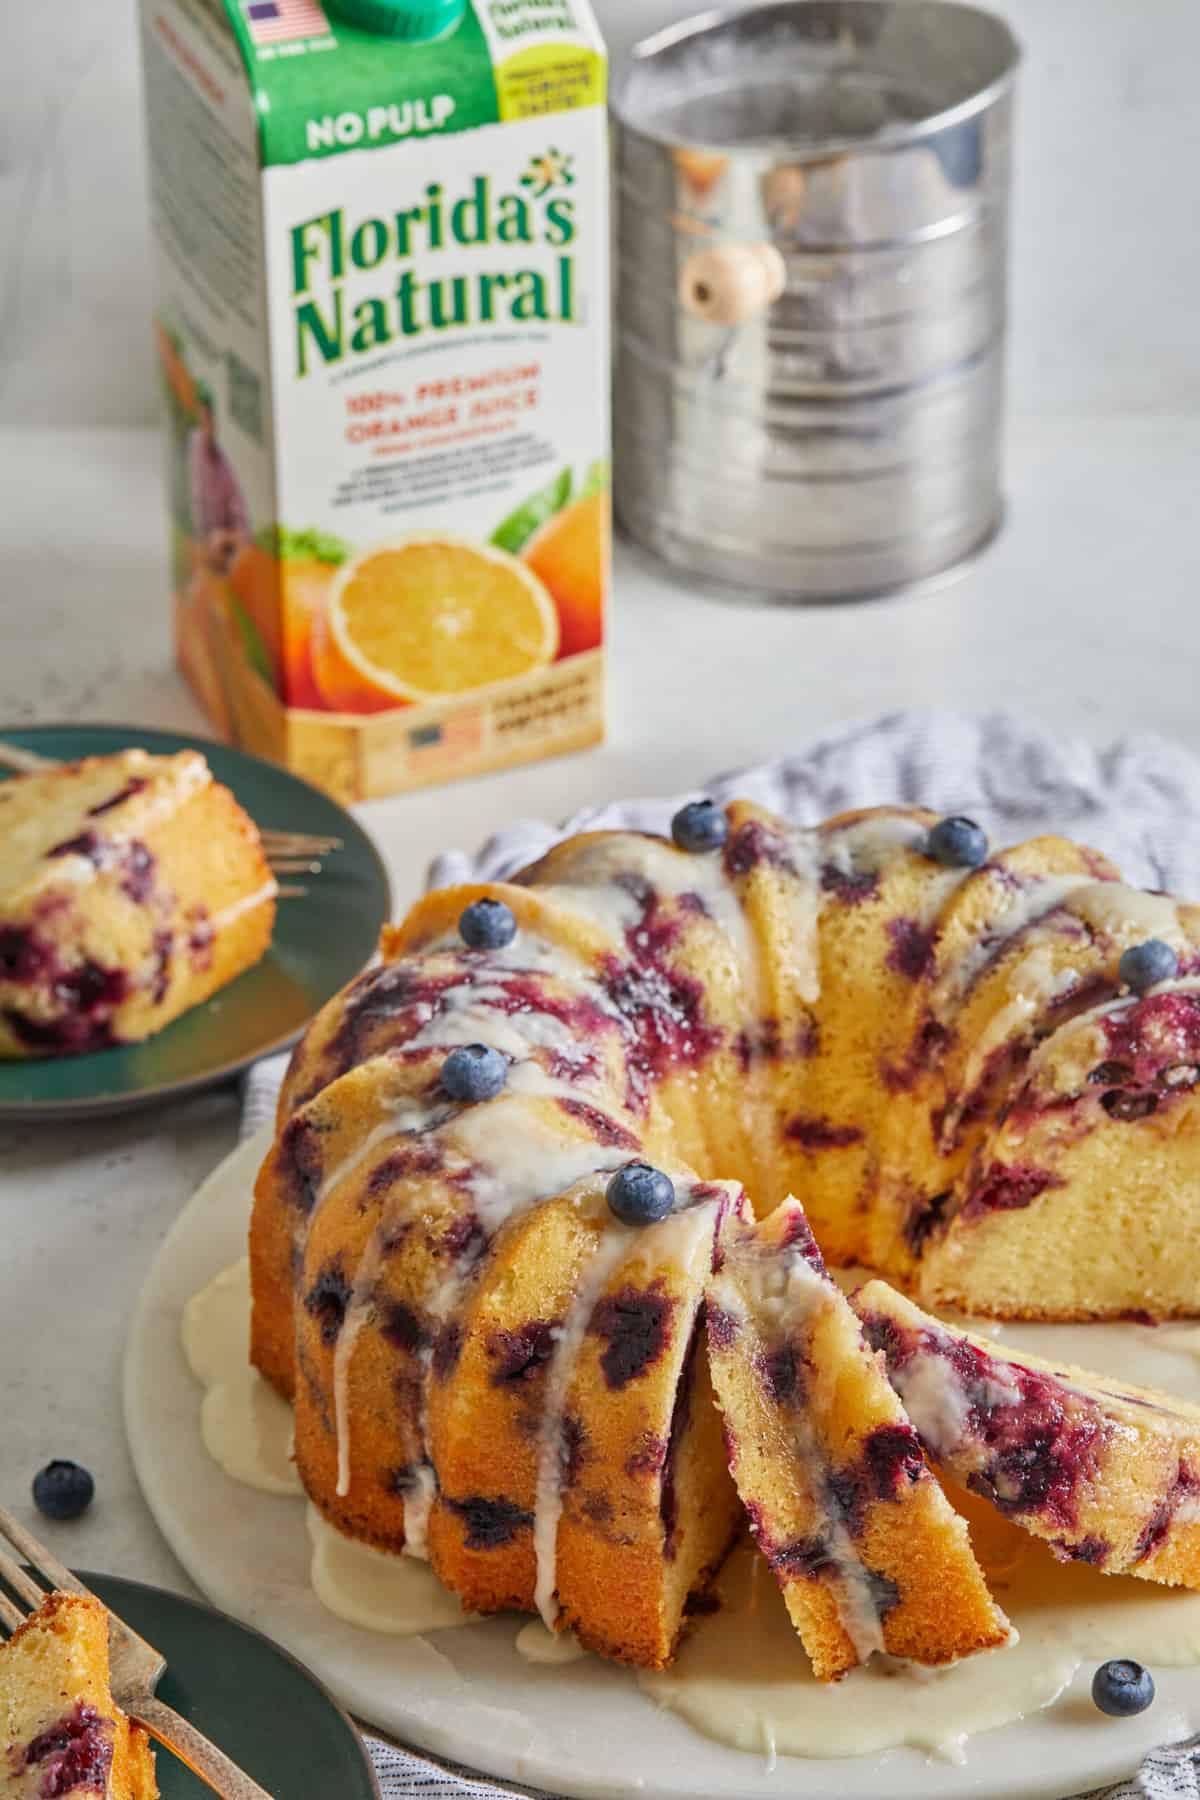 An orange blueberry bundt with slices cut ready to serve